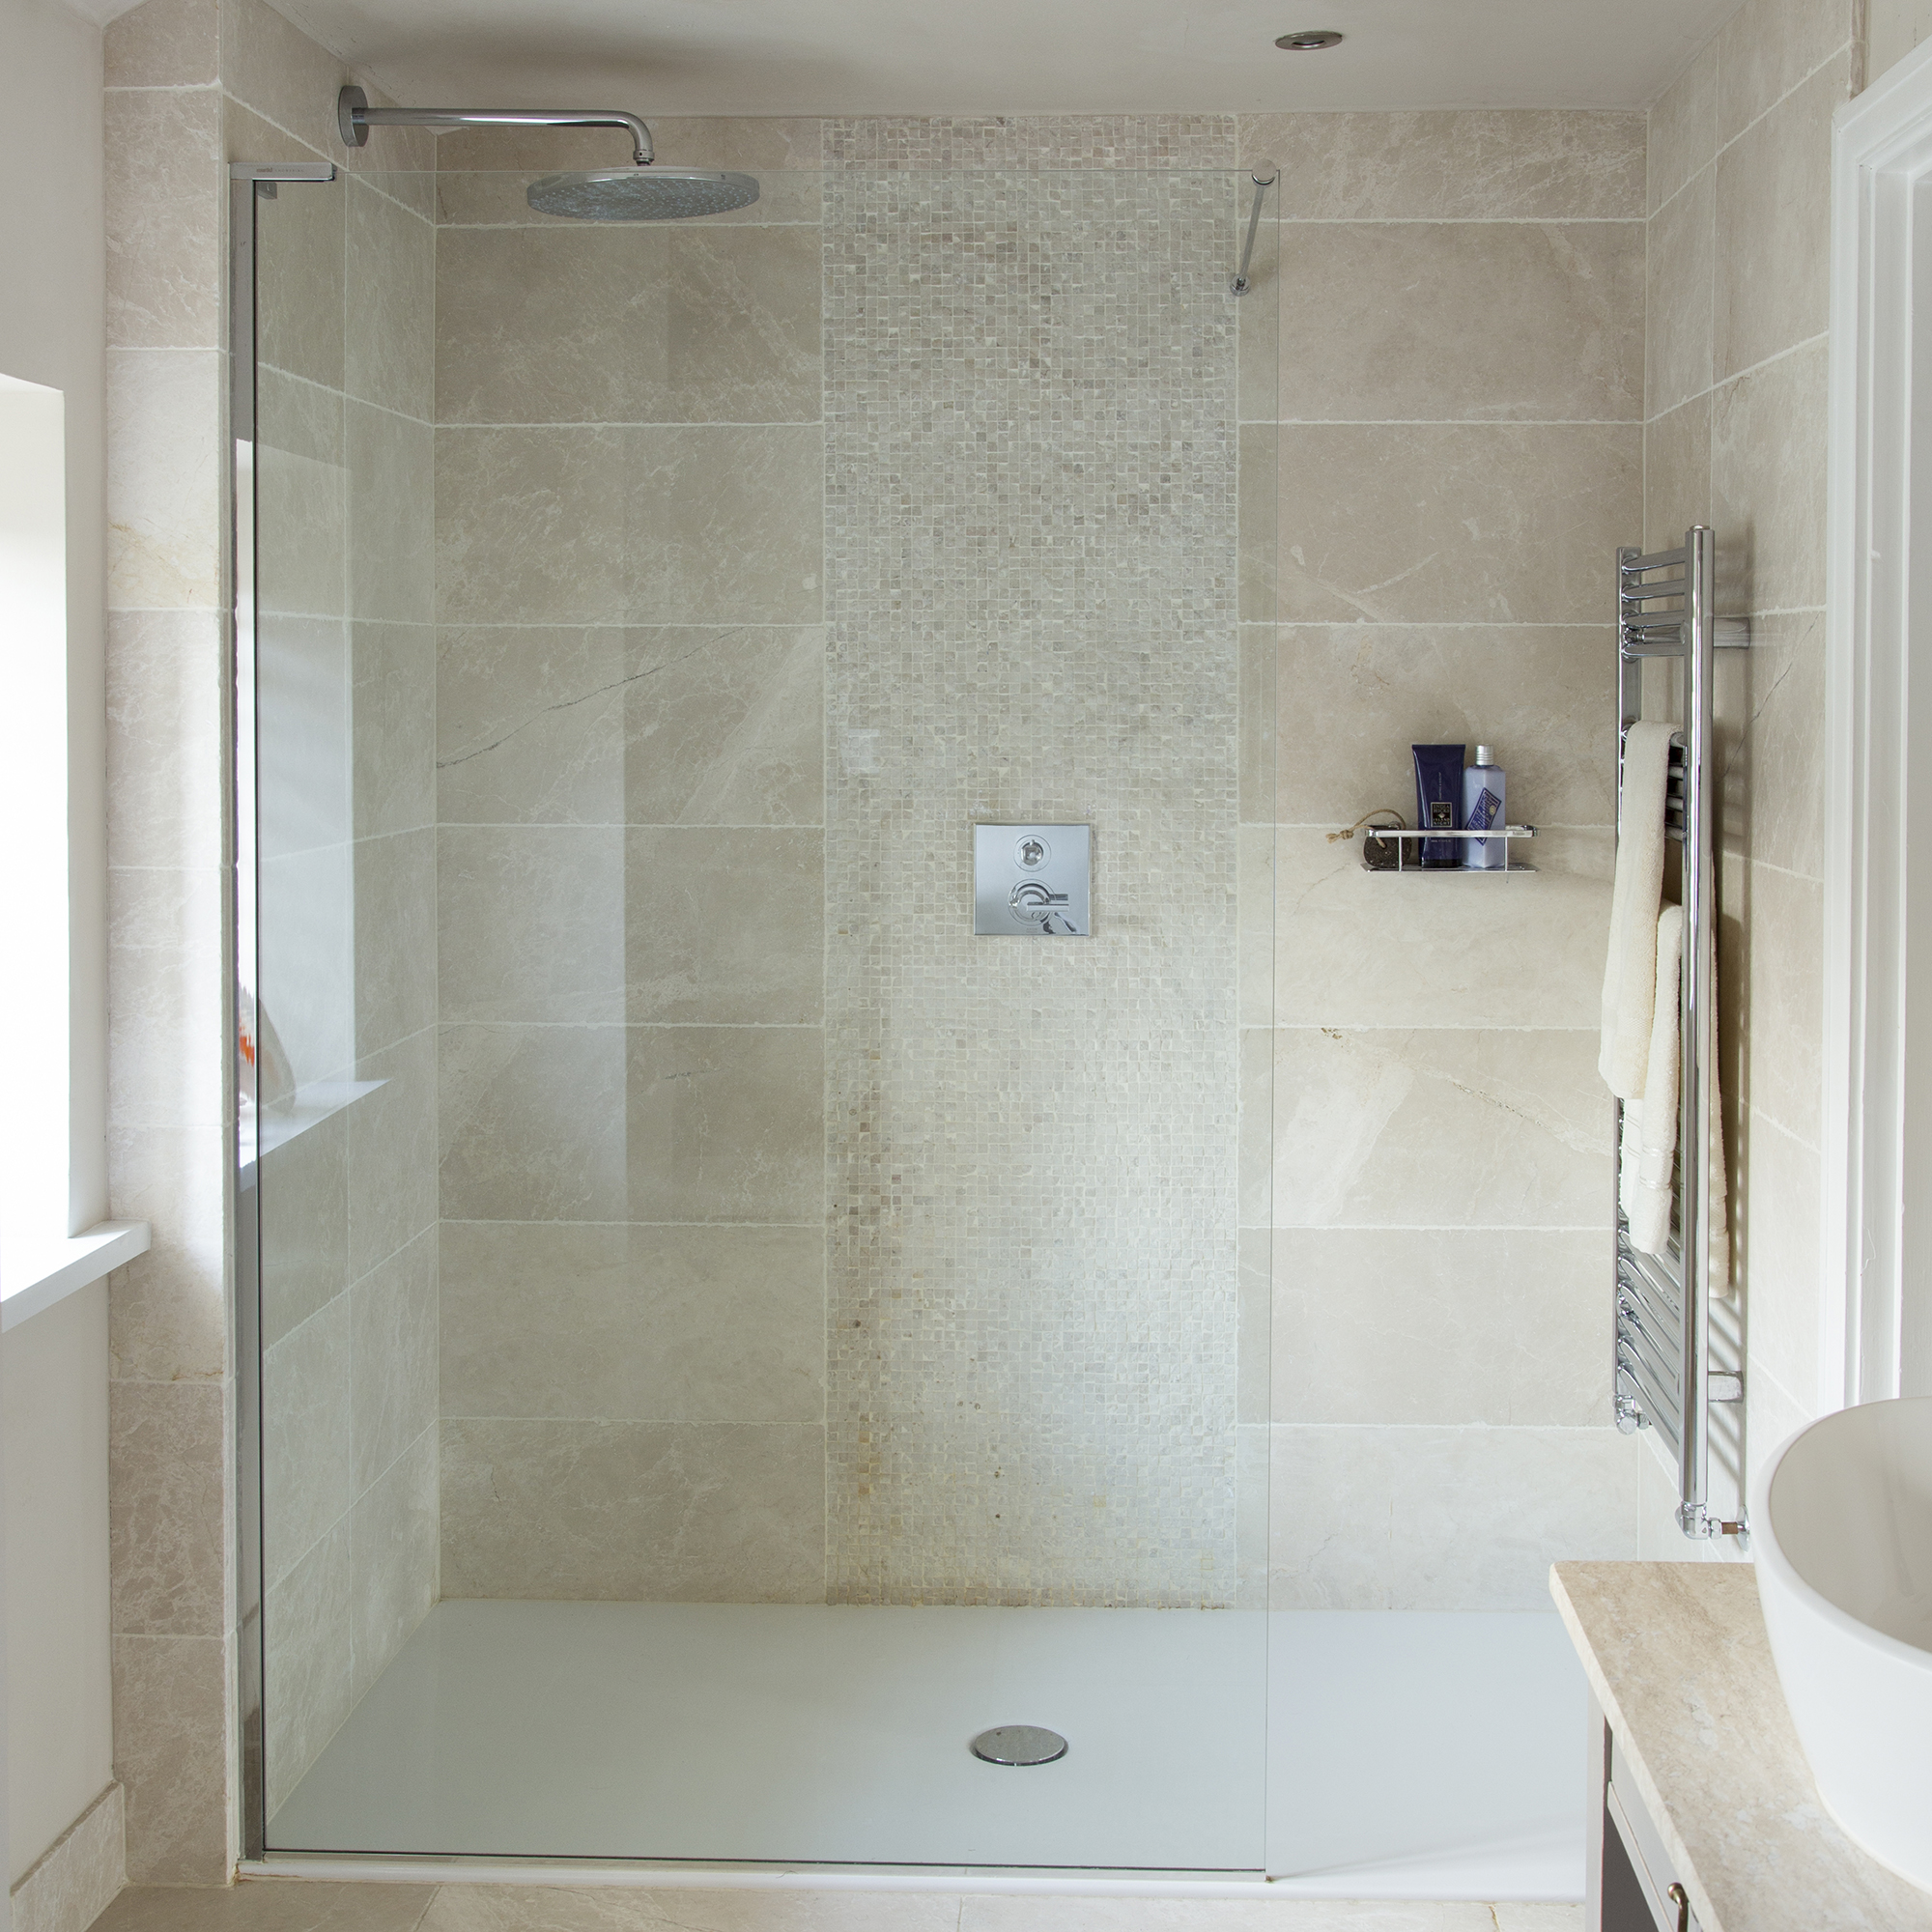 bathroom with tiled walls and shower on wall